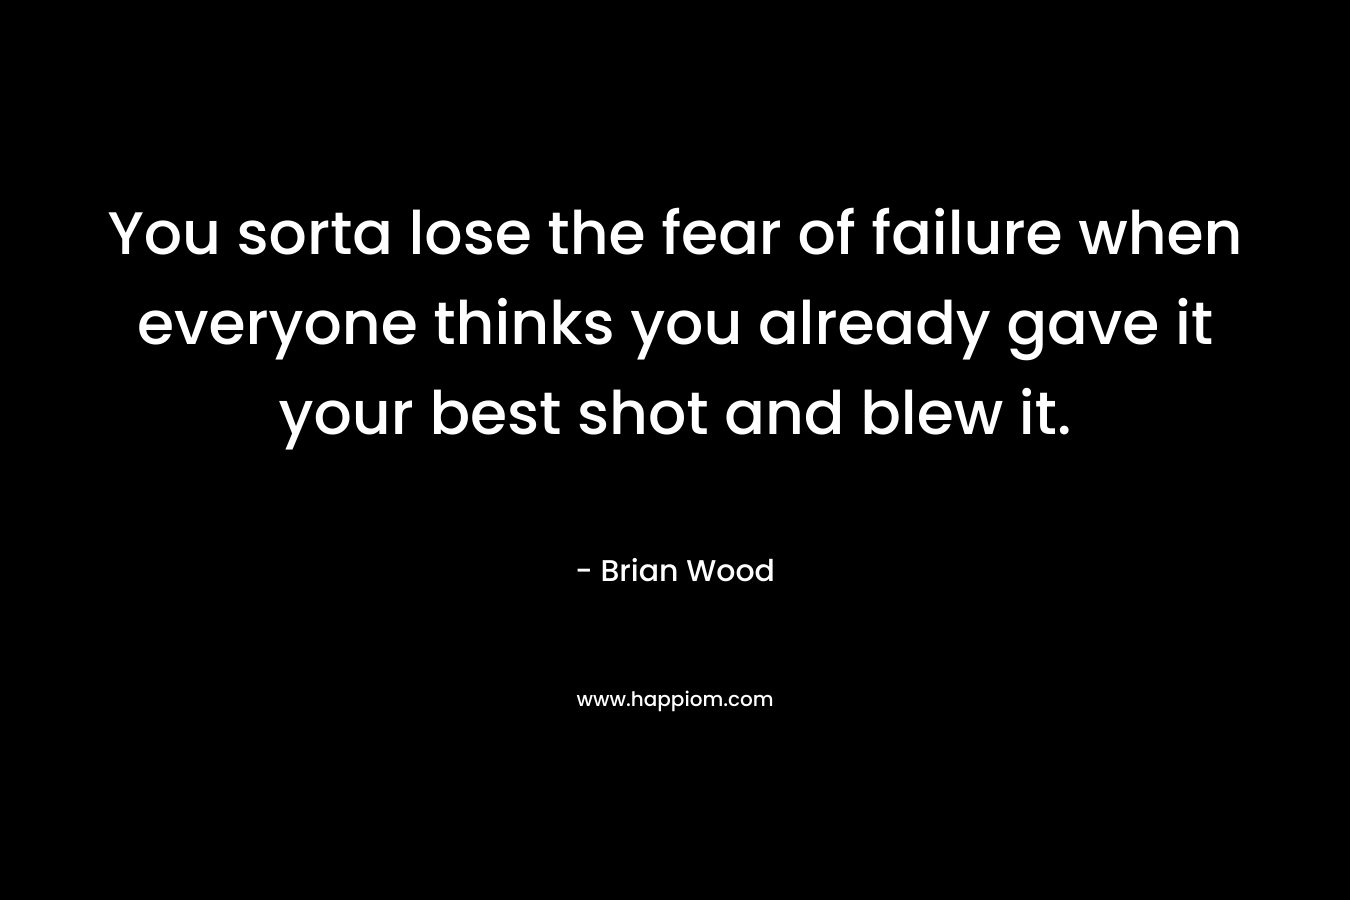 You sorta lose the fear of failure when everyone thinks you already gave it your best shot and blew it.